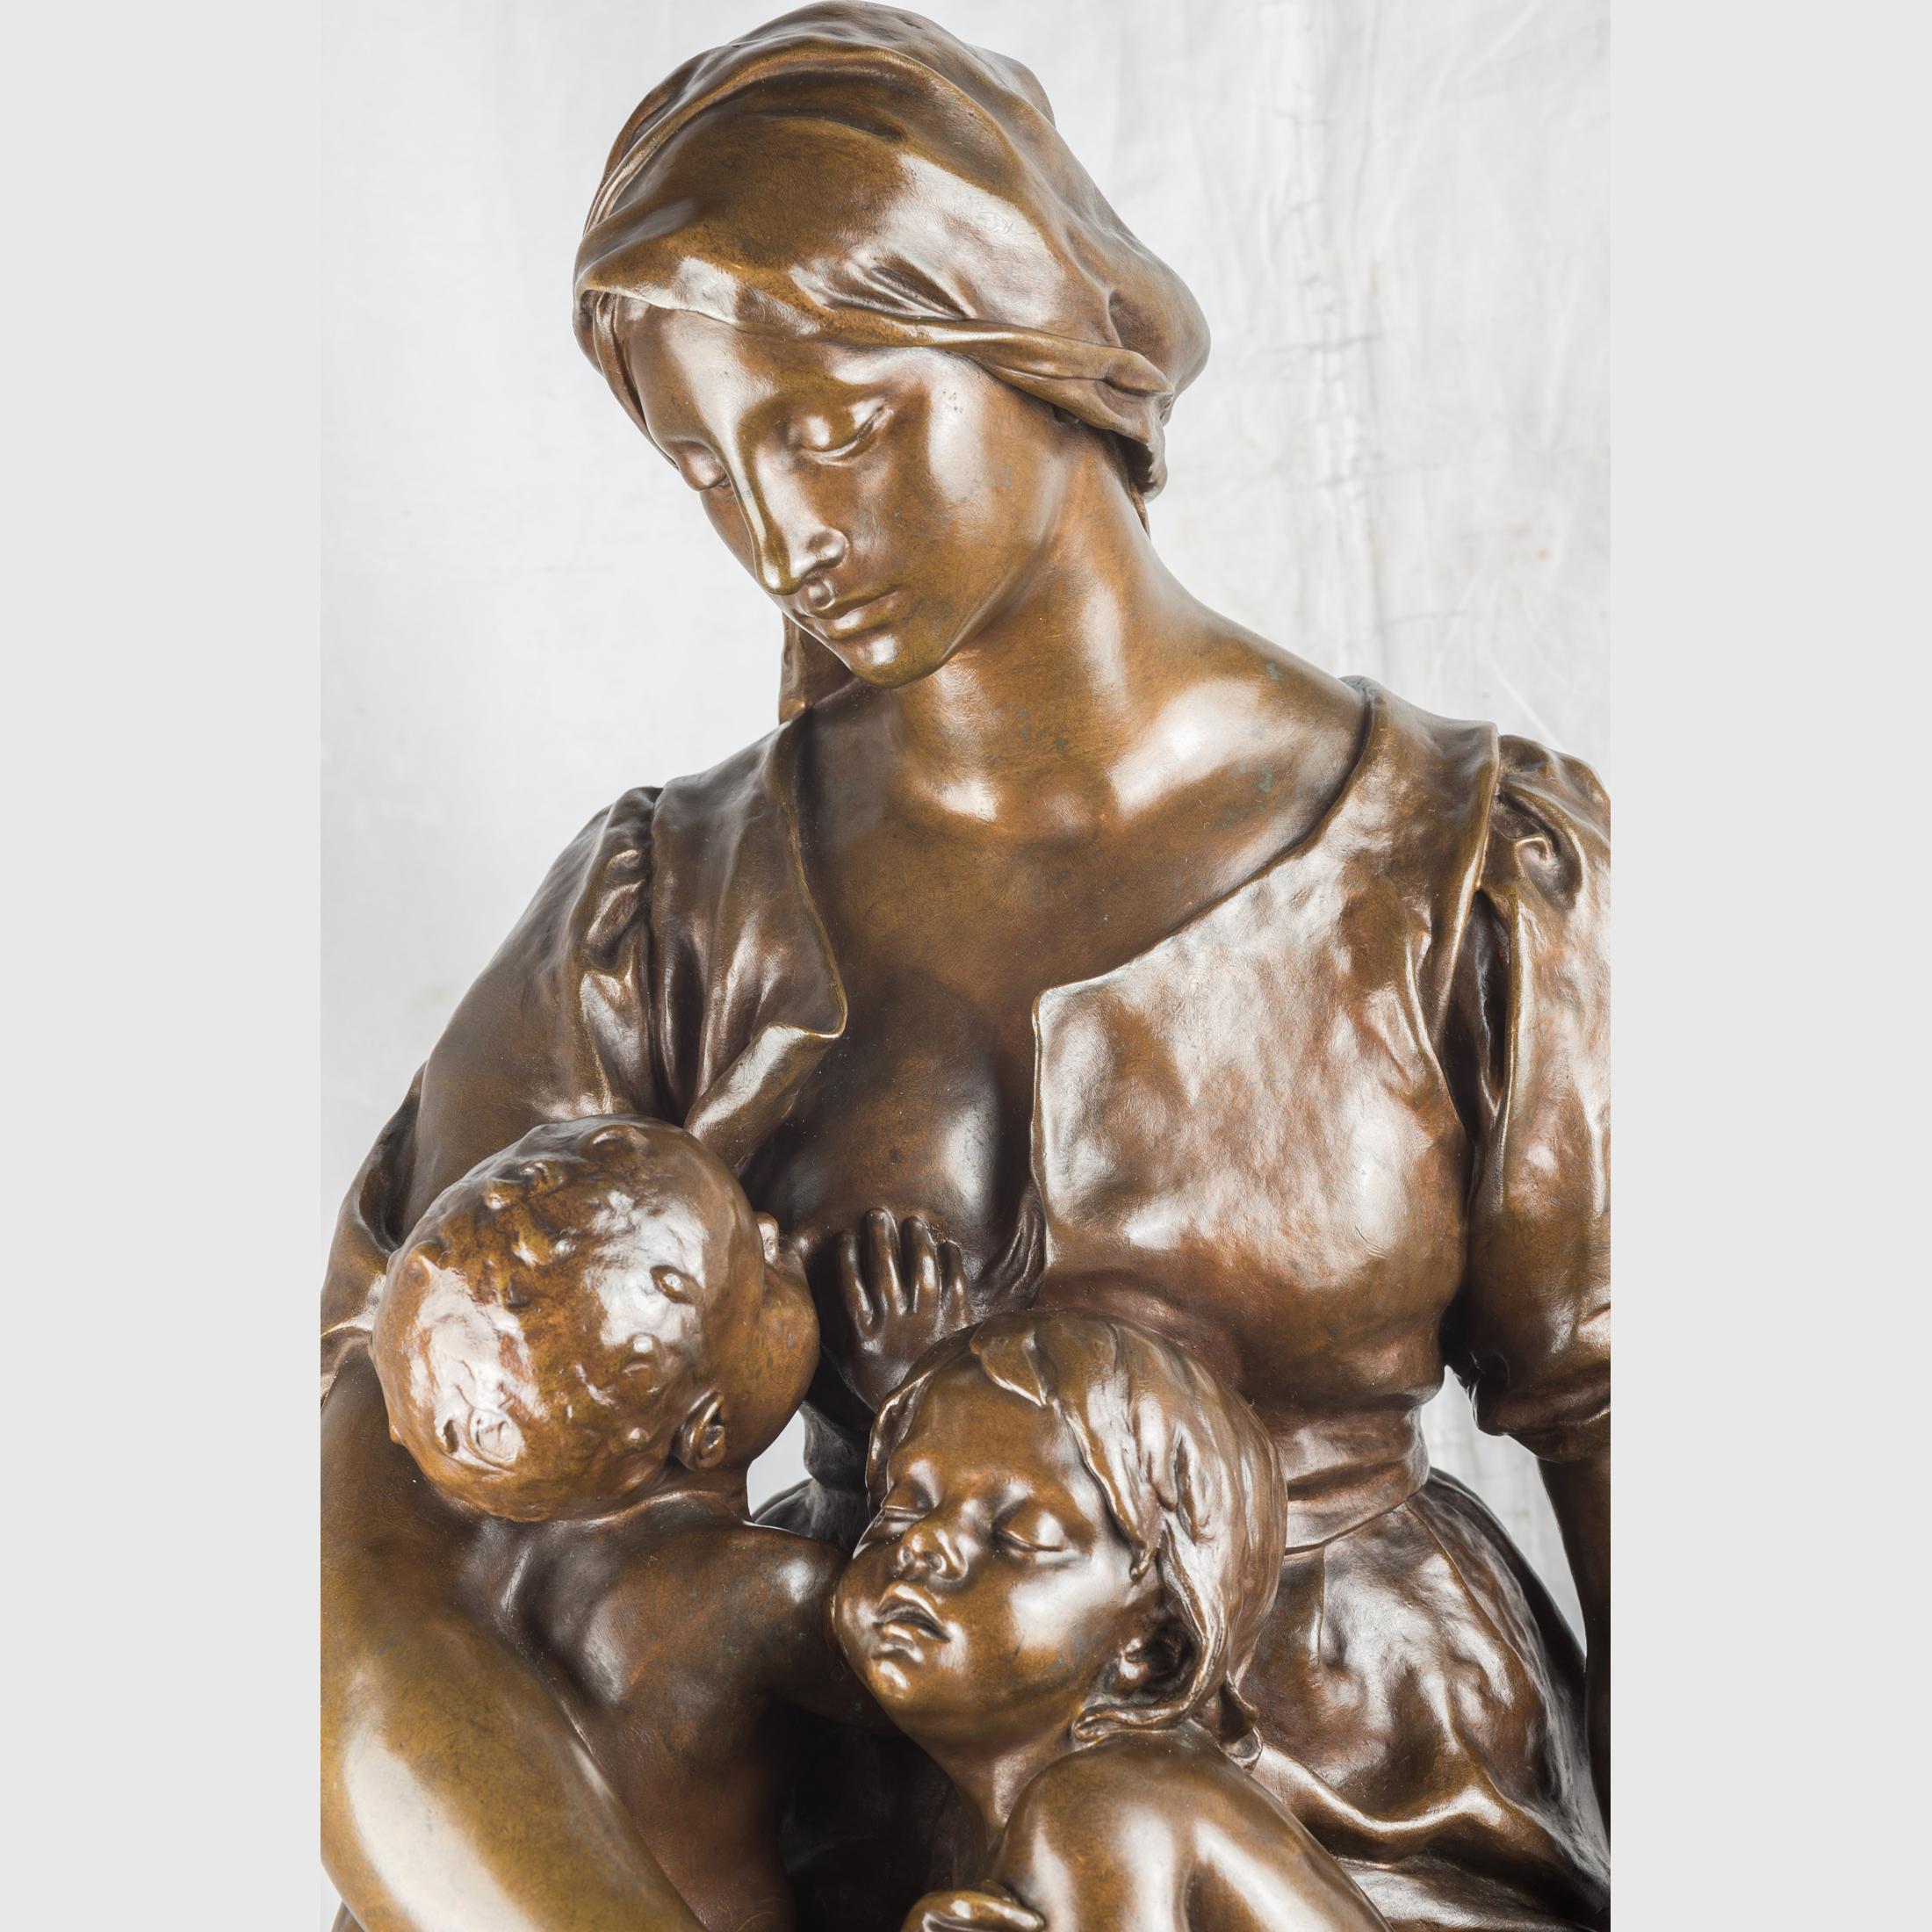 Fine quality 19th century patinated bronze sculpture of a breastfeeding mother by Paul Dubois
Signed P. DUBOIS and F. BARBEDIENNE.Fondeur.Paris, with Reduction Mécanique stamp, numbered 667 

Artist: Paul Dubois (1827-1905)
Origin: French
Date: